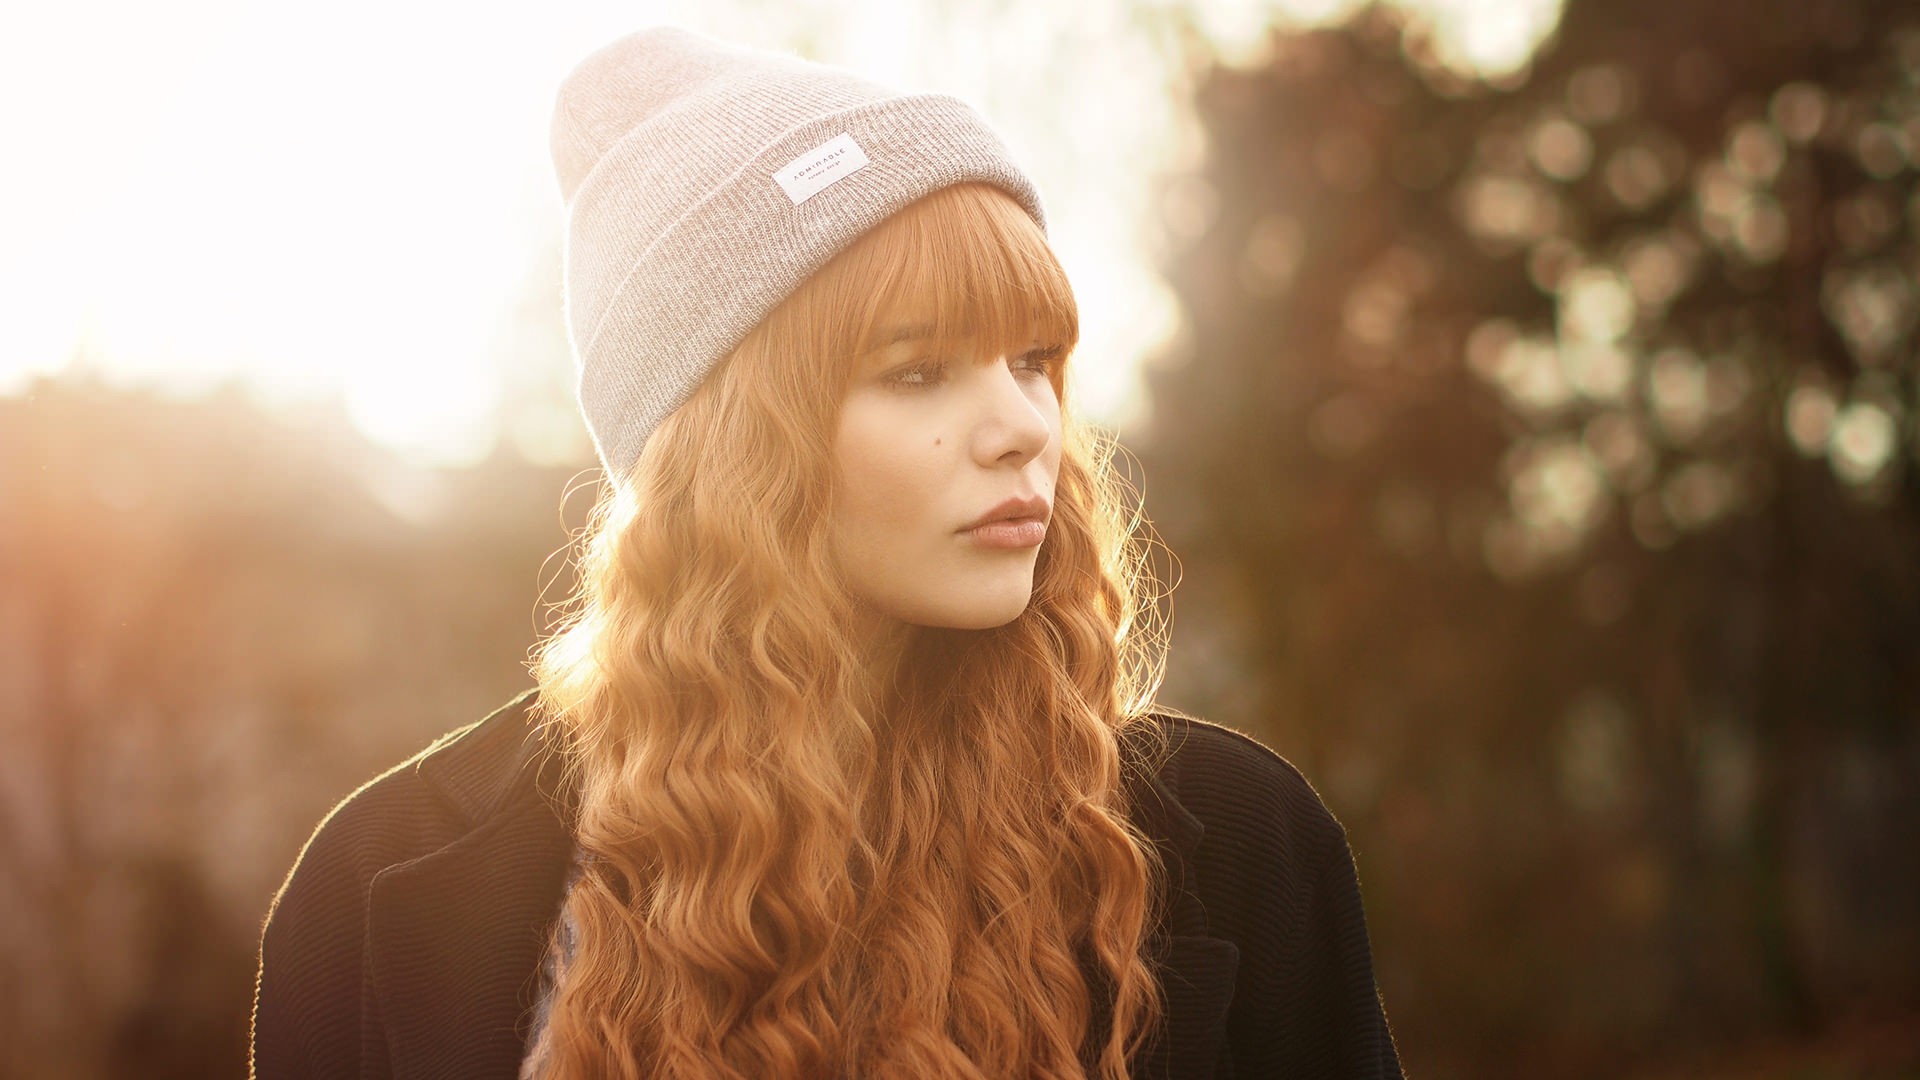 People 1920x1080 Julia Coldfront women redhead face portrait wool cap long hair women outdoors looking away hat natural light red lipstick closeup overexposed